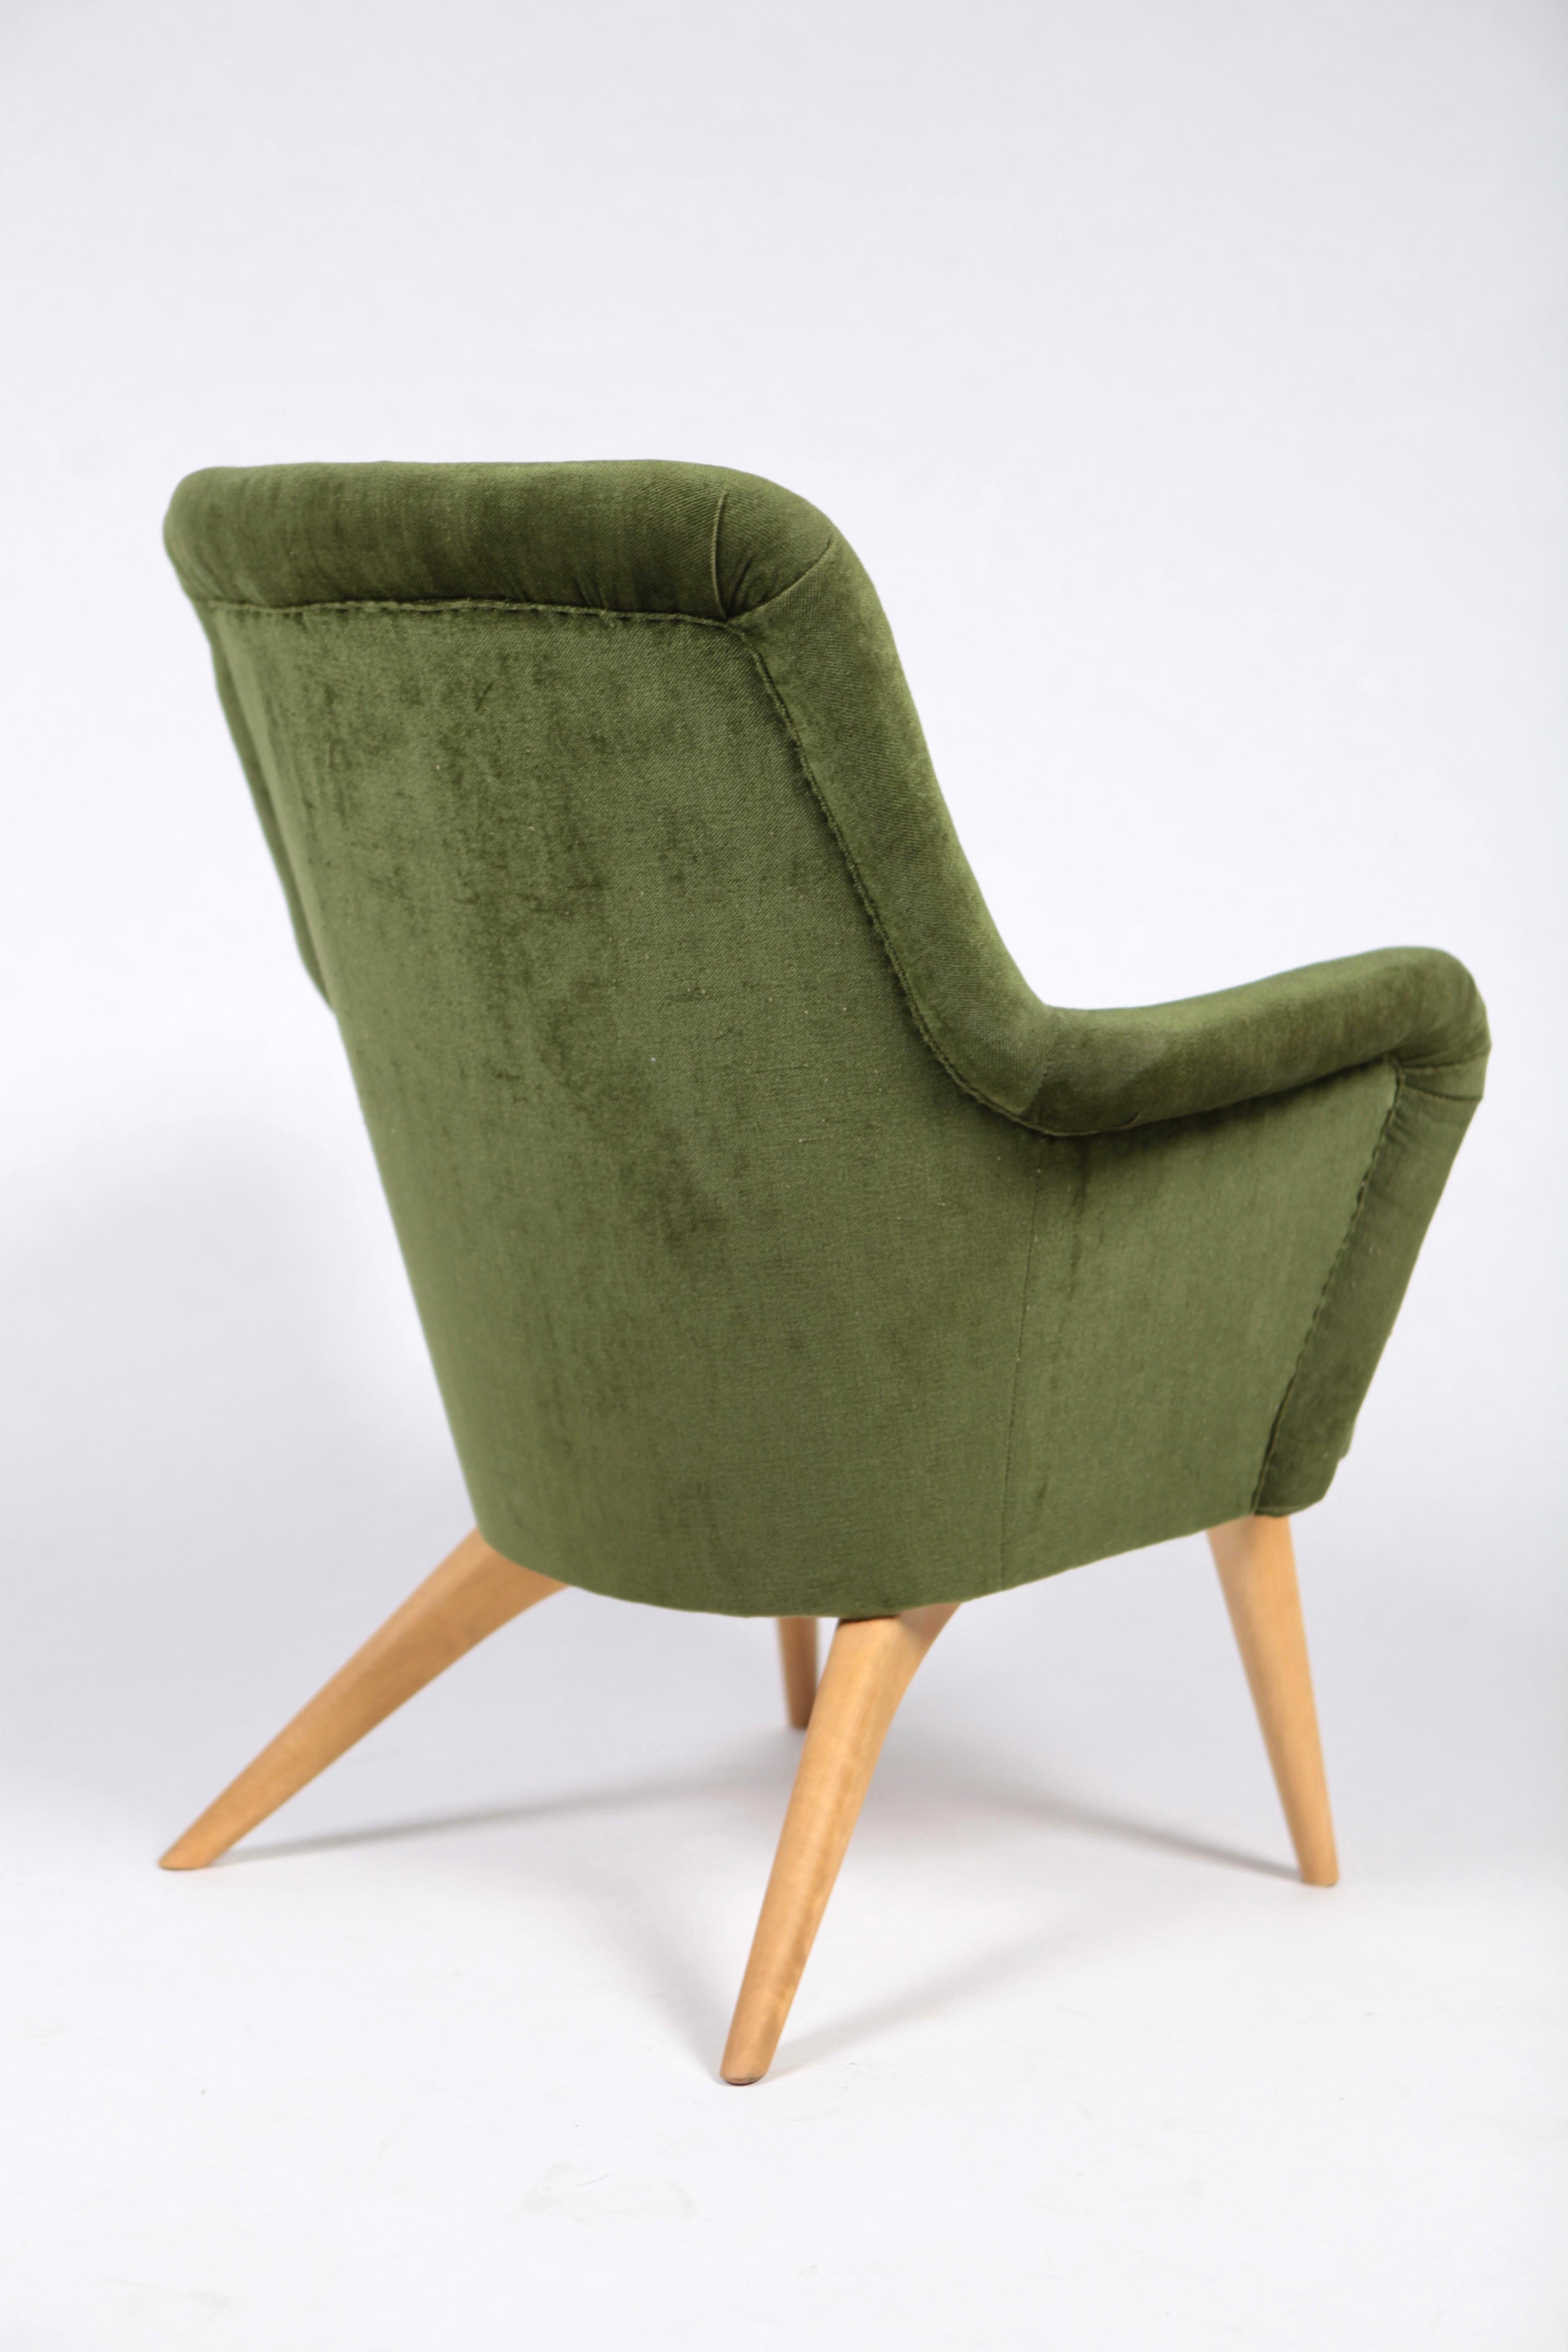 A 'Pedro' lounge chair designed by Carl Gustaf Hiort af Ornäs for Puunveisto Oy in Finland, 1950.
Very good vintage condition, upholstered in green velour.